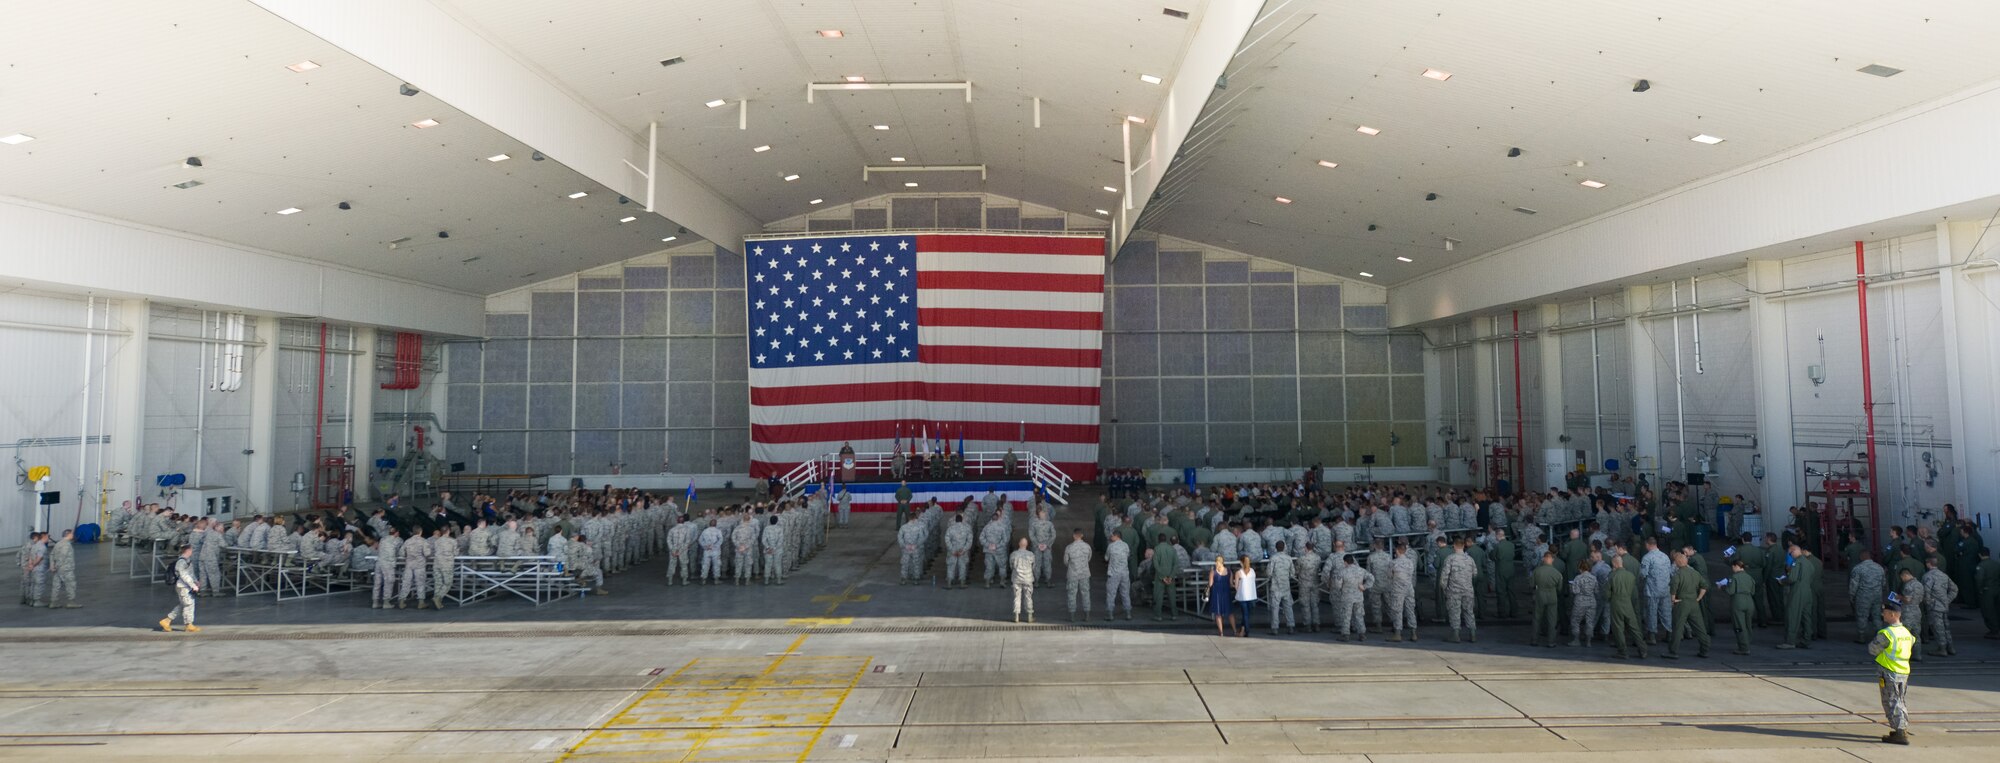 U.S. Air Force Brig. Gen. Jesse Simmons Jr., commander, Georgia Air National Guard, speaks to the audience during the 116th Air Control Wing (ACW) Change of Command ceremony at Robins Air Force Base, Ga., July 11, 2015. Col. Mark Weber assumed command of the 116th ACW from Col. Kevin Clotfelter during the ceremony officiated by Simmons. The 116th ACW provides manned, joint airborne command and control, battle management, intelligence, surveillance, and reconnaissance support to combatant commanders around the globe flying the E-8C Joint STARS aircraft. (U.S. Air National Guard photo by Senior Master Sgt. Roger Parsons/Released)
